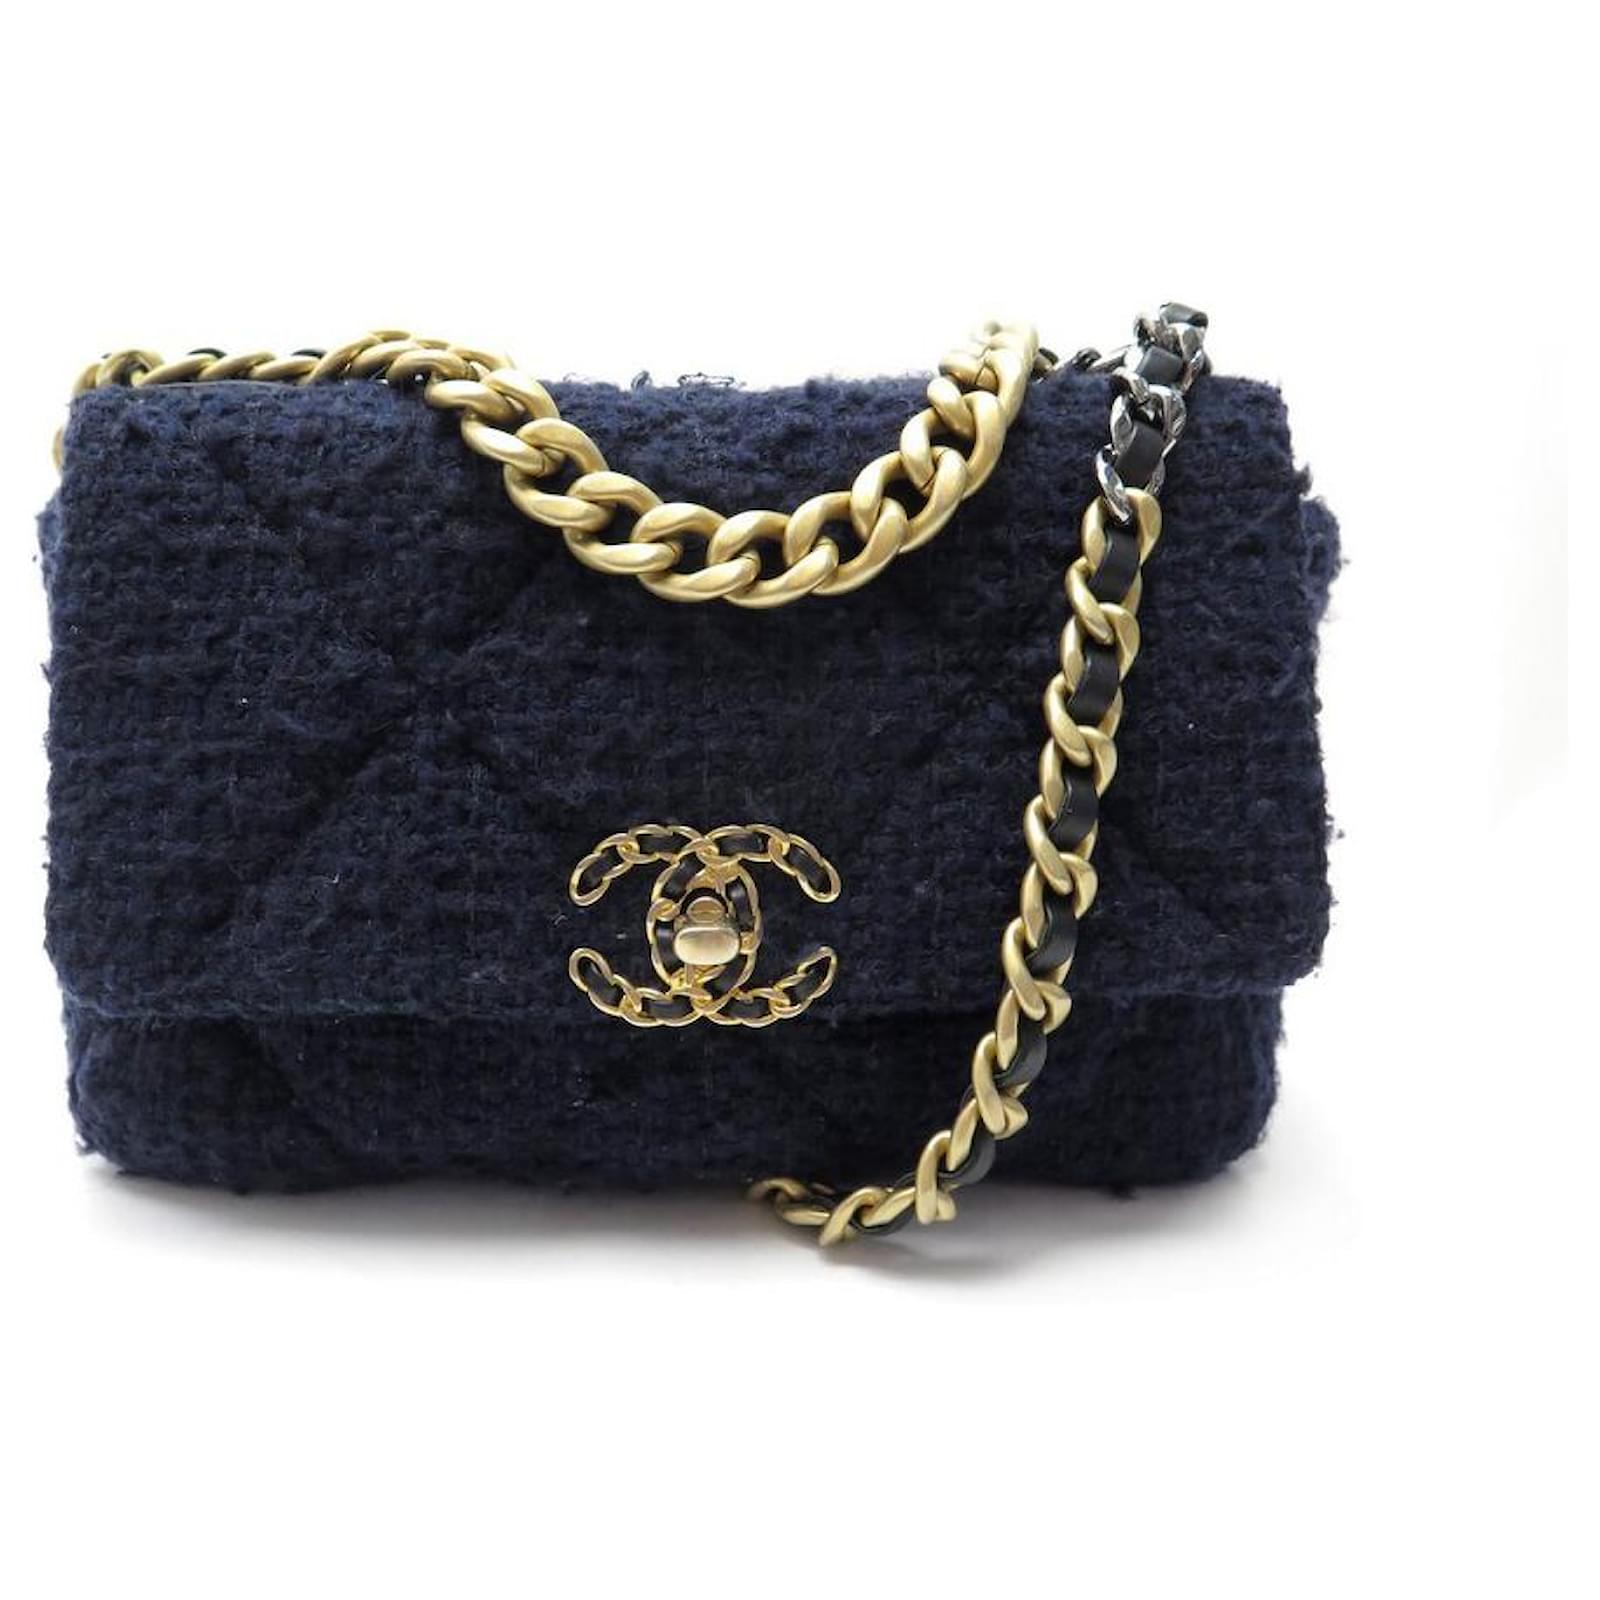 Snag the Latest CHANEL Leather Exterior Blue Bags & Handbags for